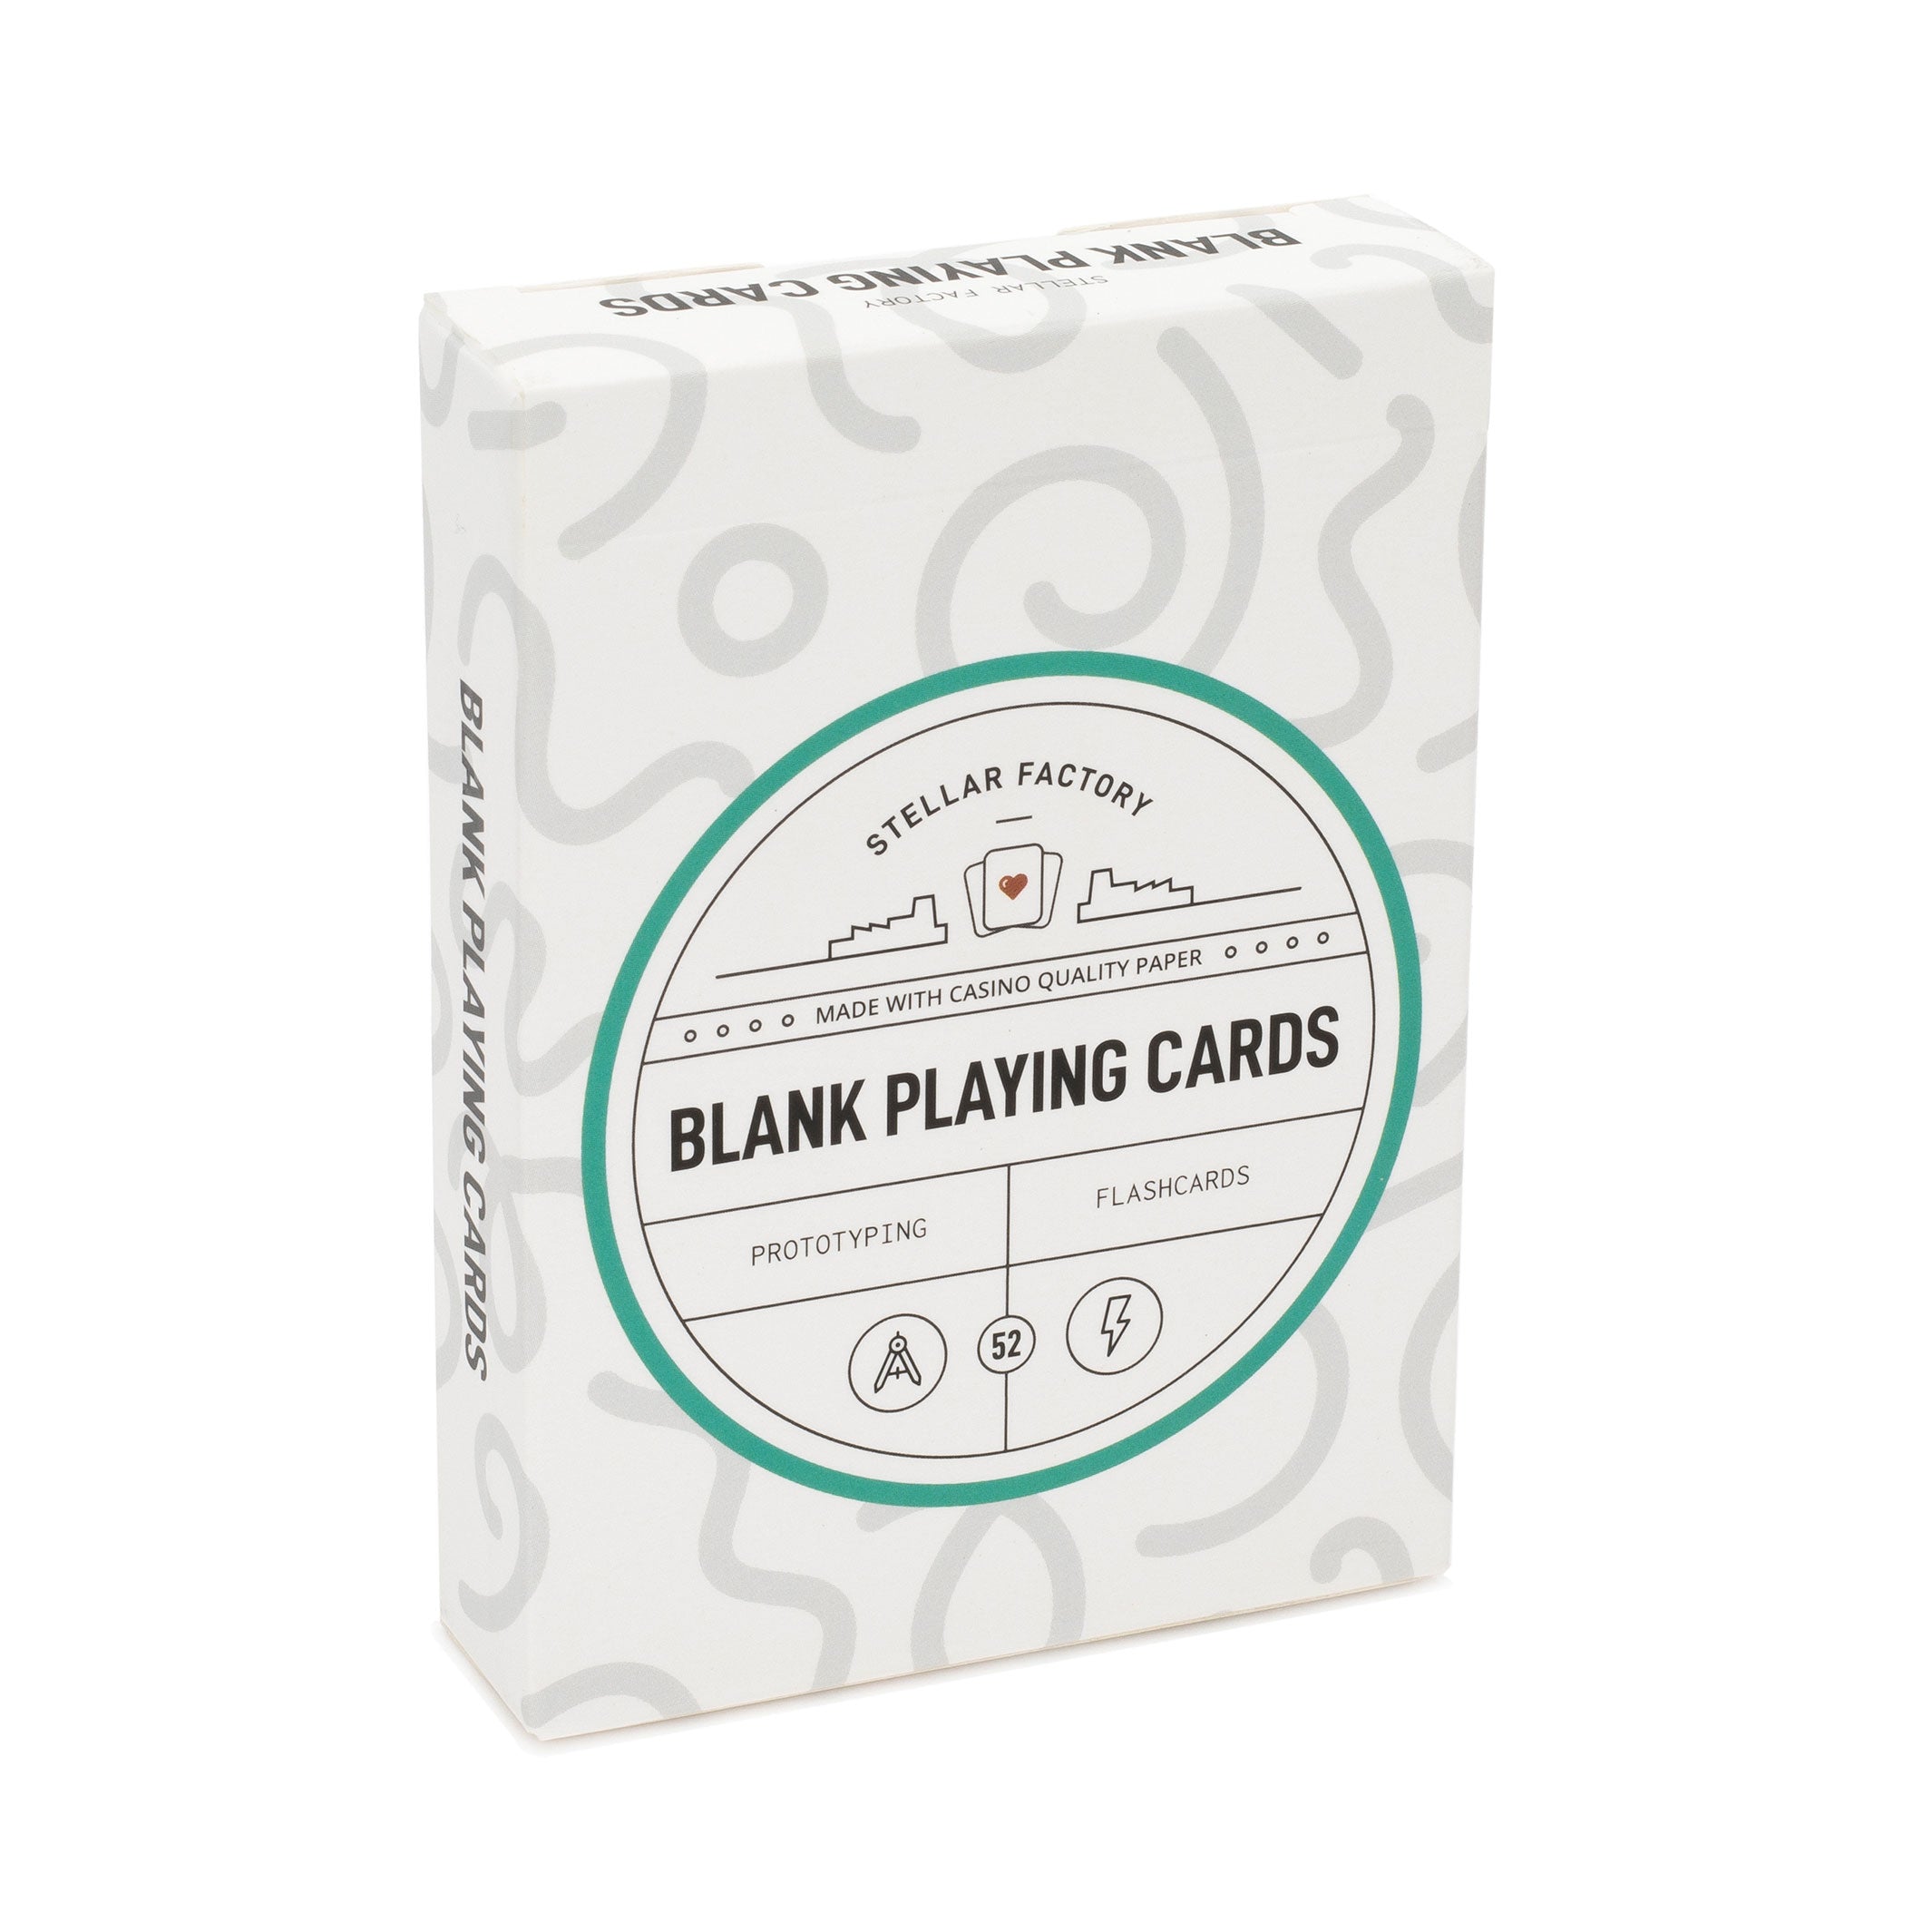 Plain Blank Playing Cards Deck